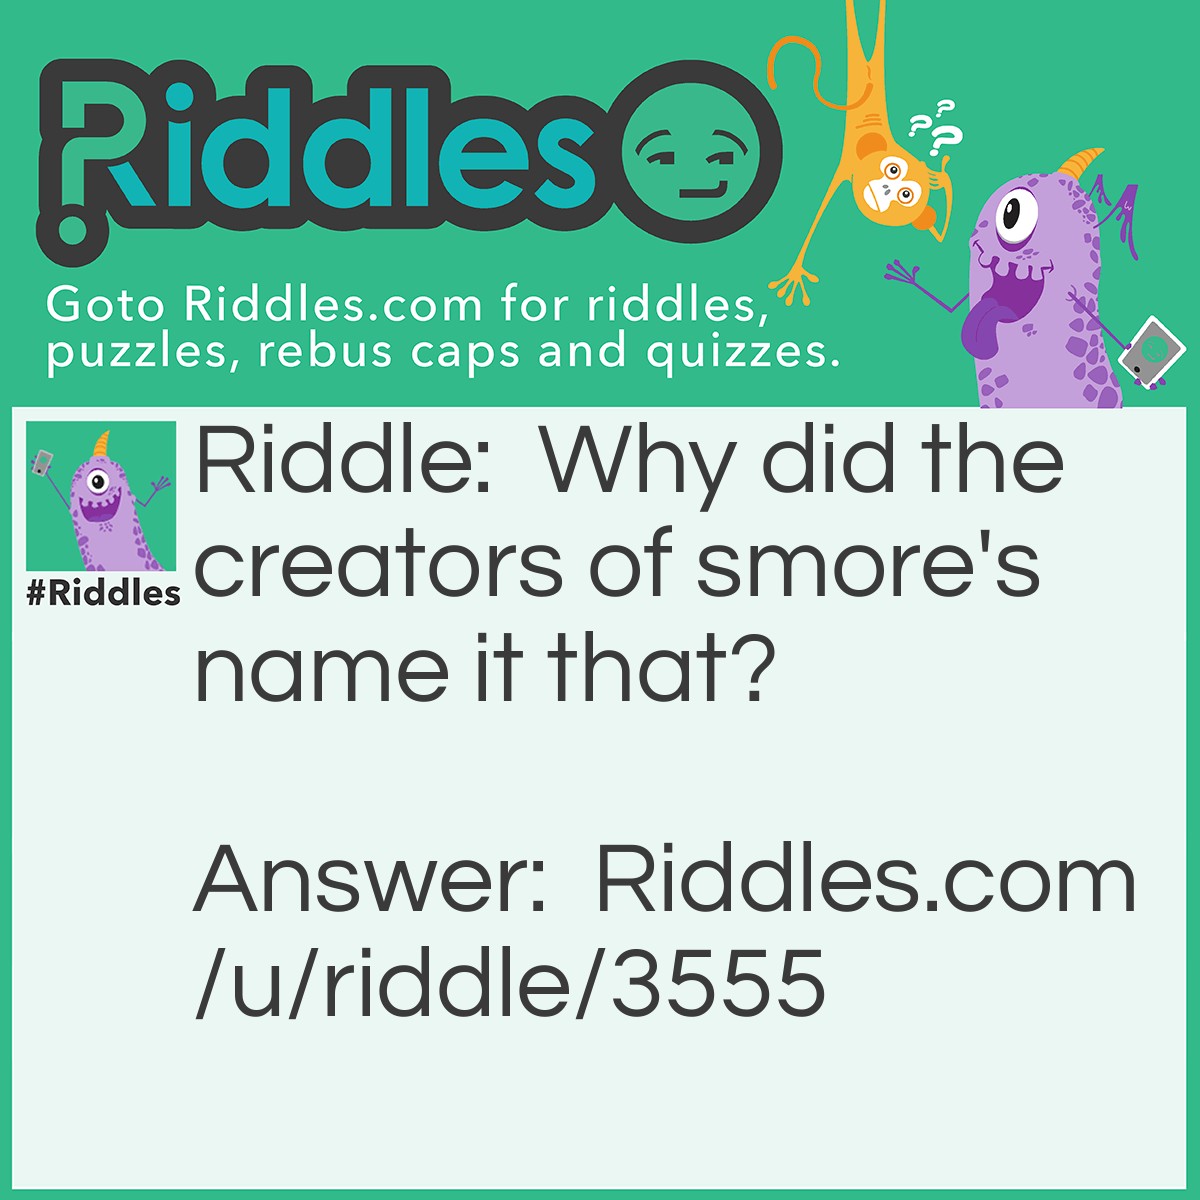 Riddle: Why did the creators of smore's name it that? Answer: Because after you eat one you want some -more.